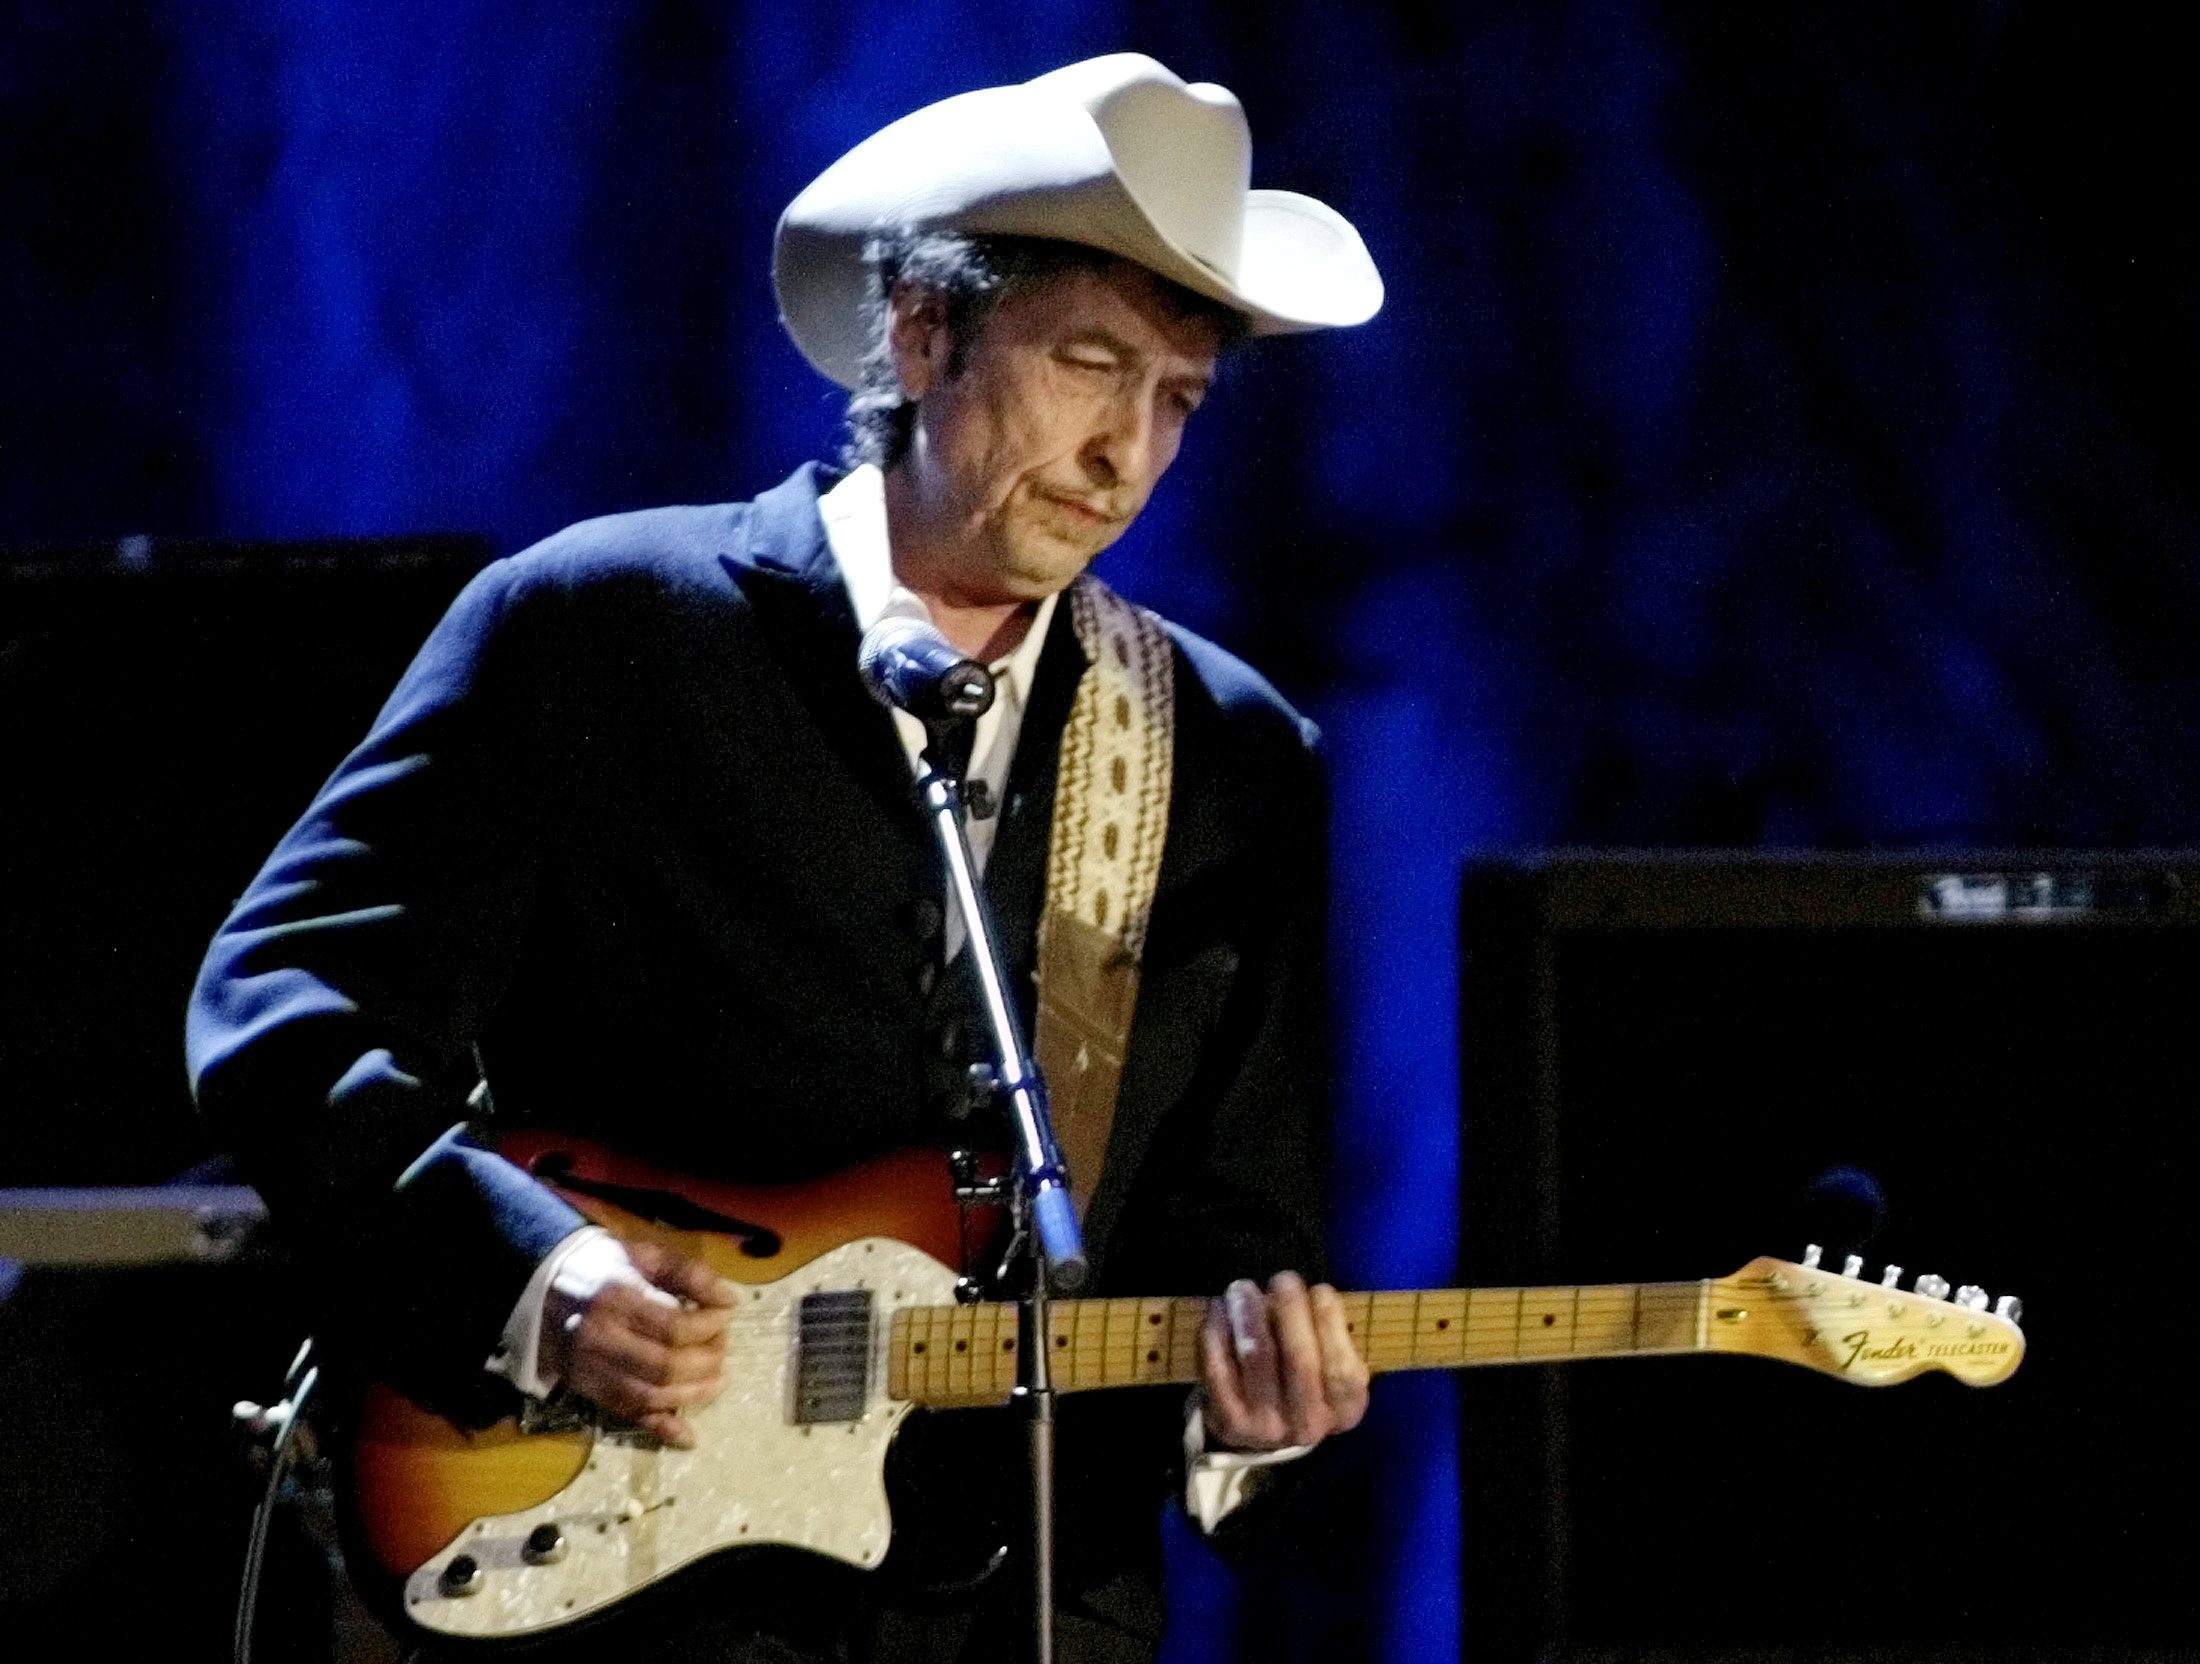 Bob Dylan sued for alleged sexual abuse of 12-year-old in 1960s